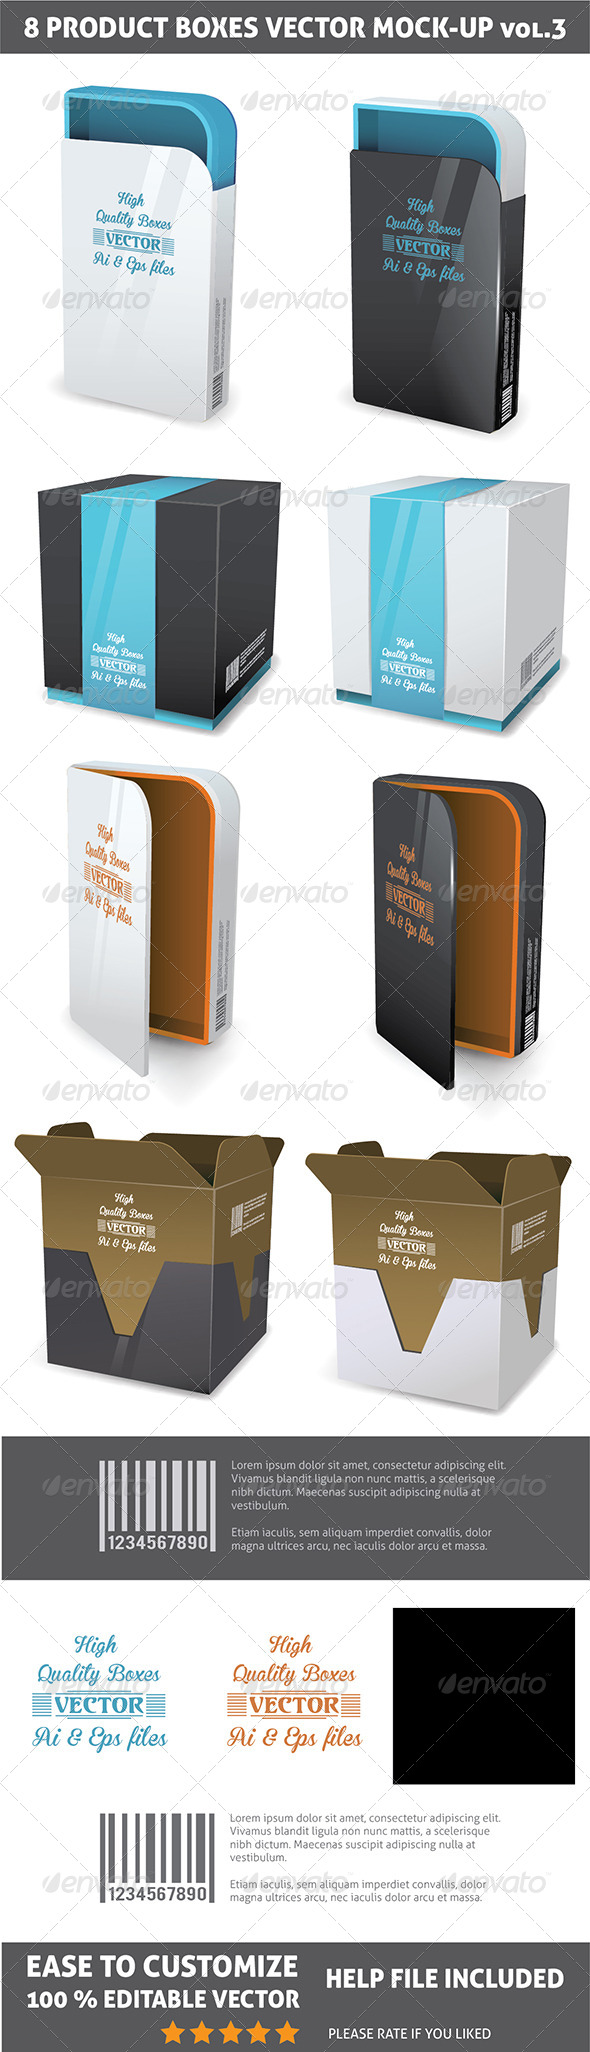 Download Stock Vector - GraphicRiver Packages Mockup 7156493 ...